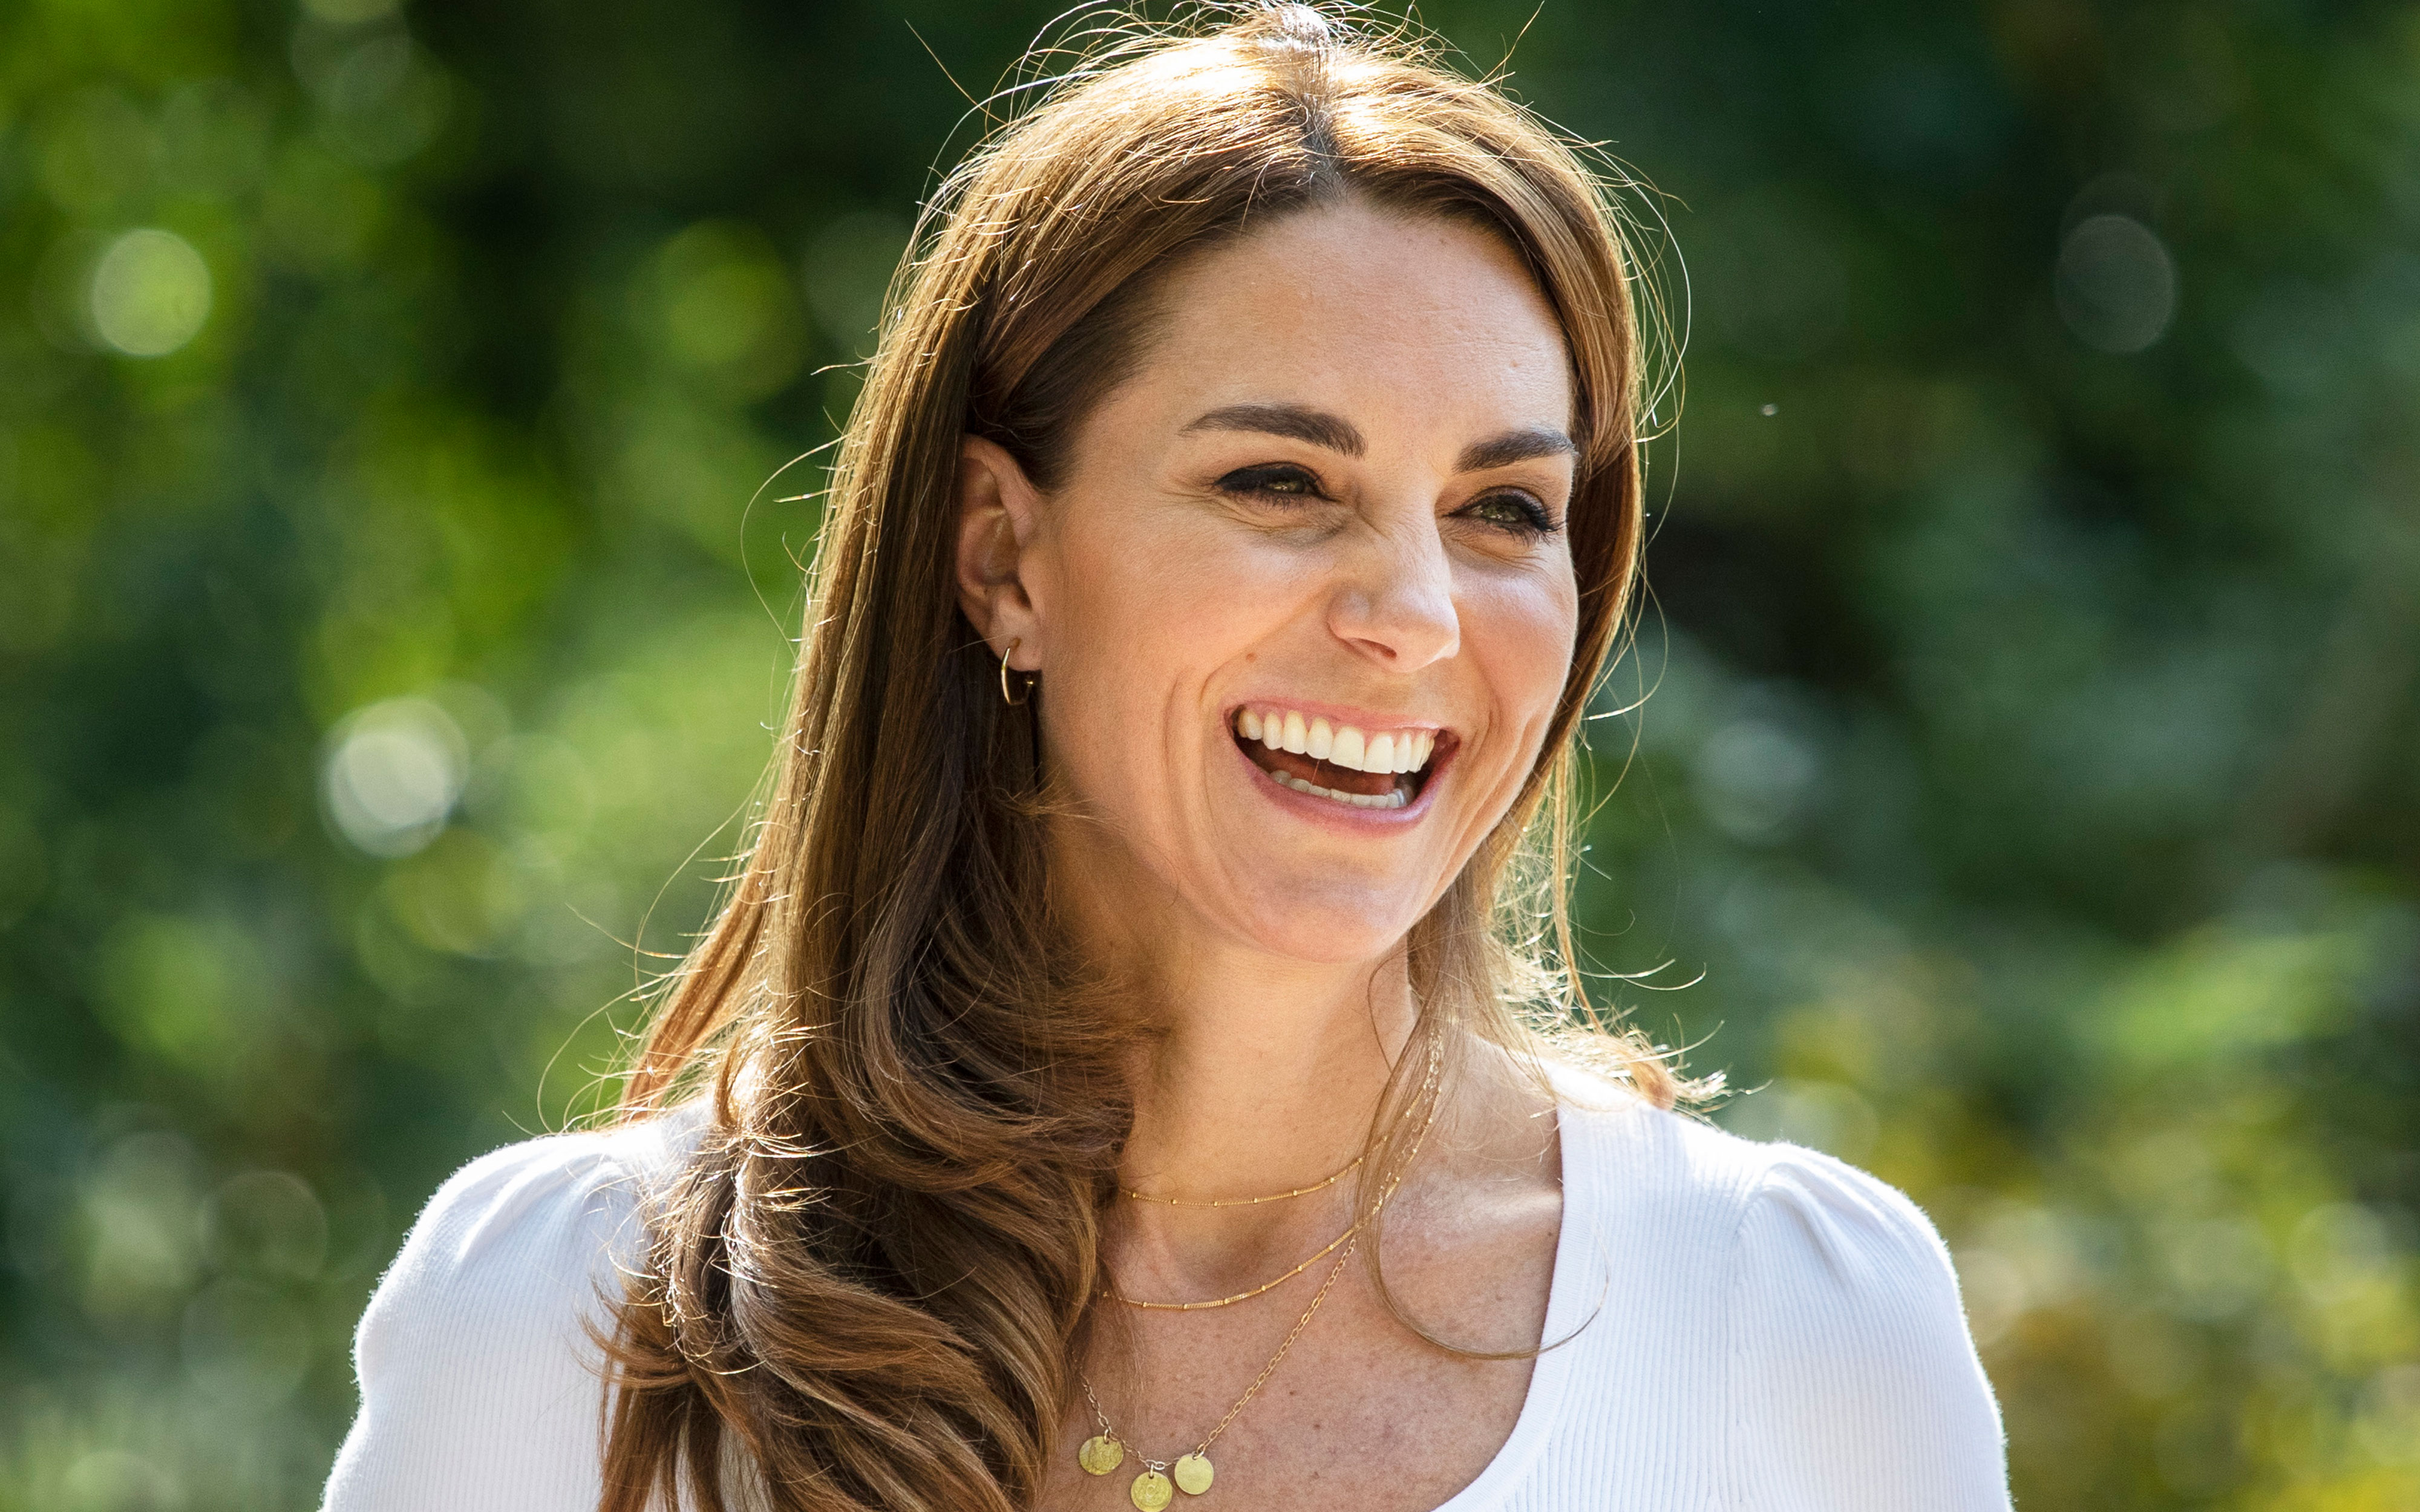 Kate Middleton’s Decade of Style and the Soft Power in Her Fashion Choices